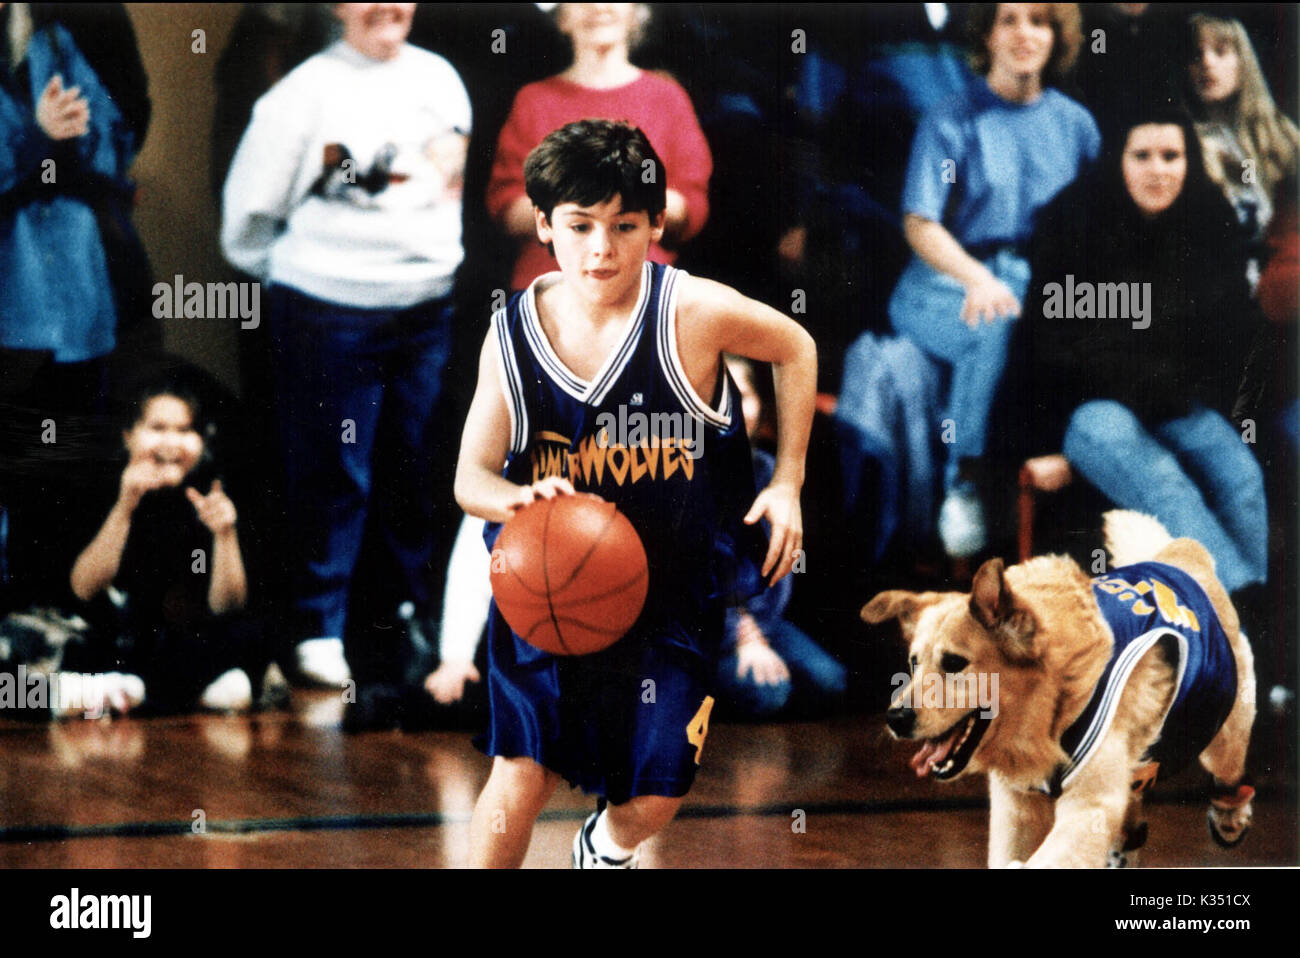 AIR BUD KEVIN ZEGERS     Date: 1997 Stock Photo